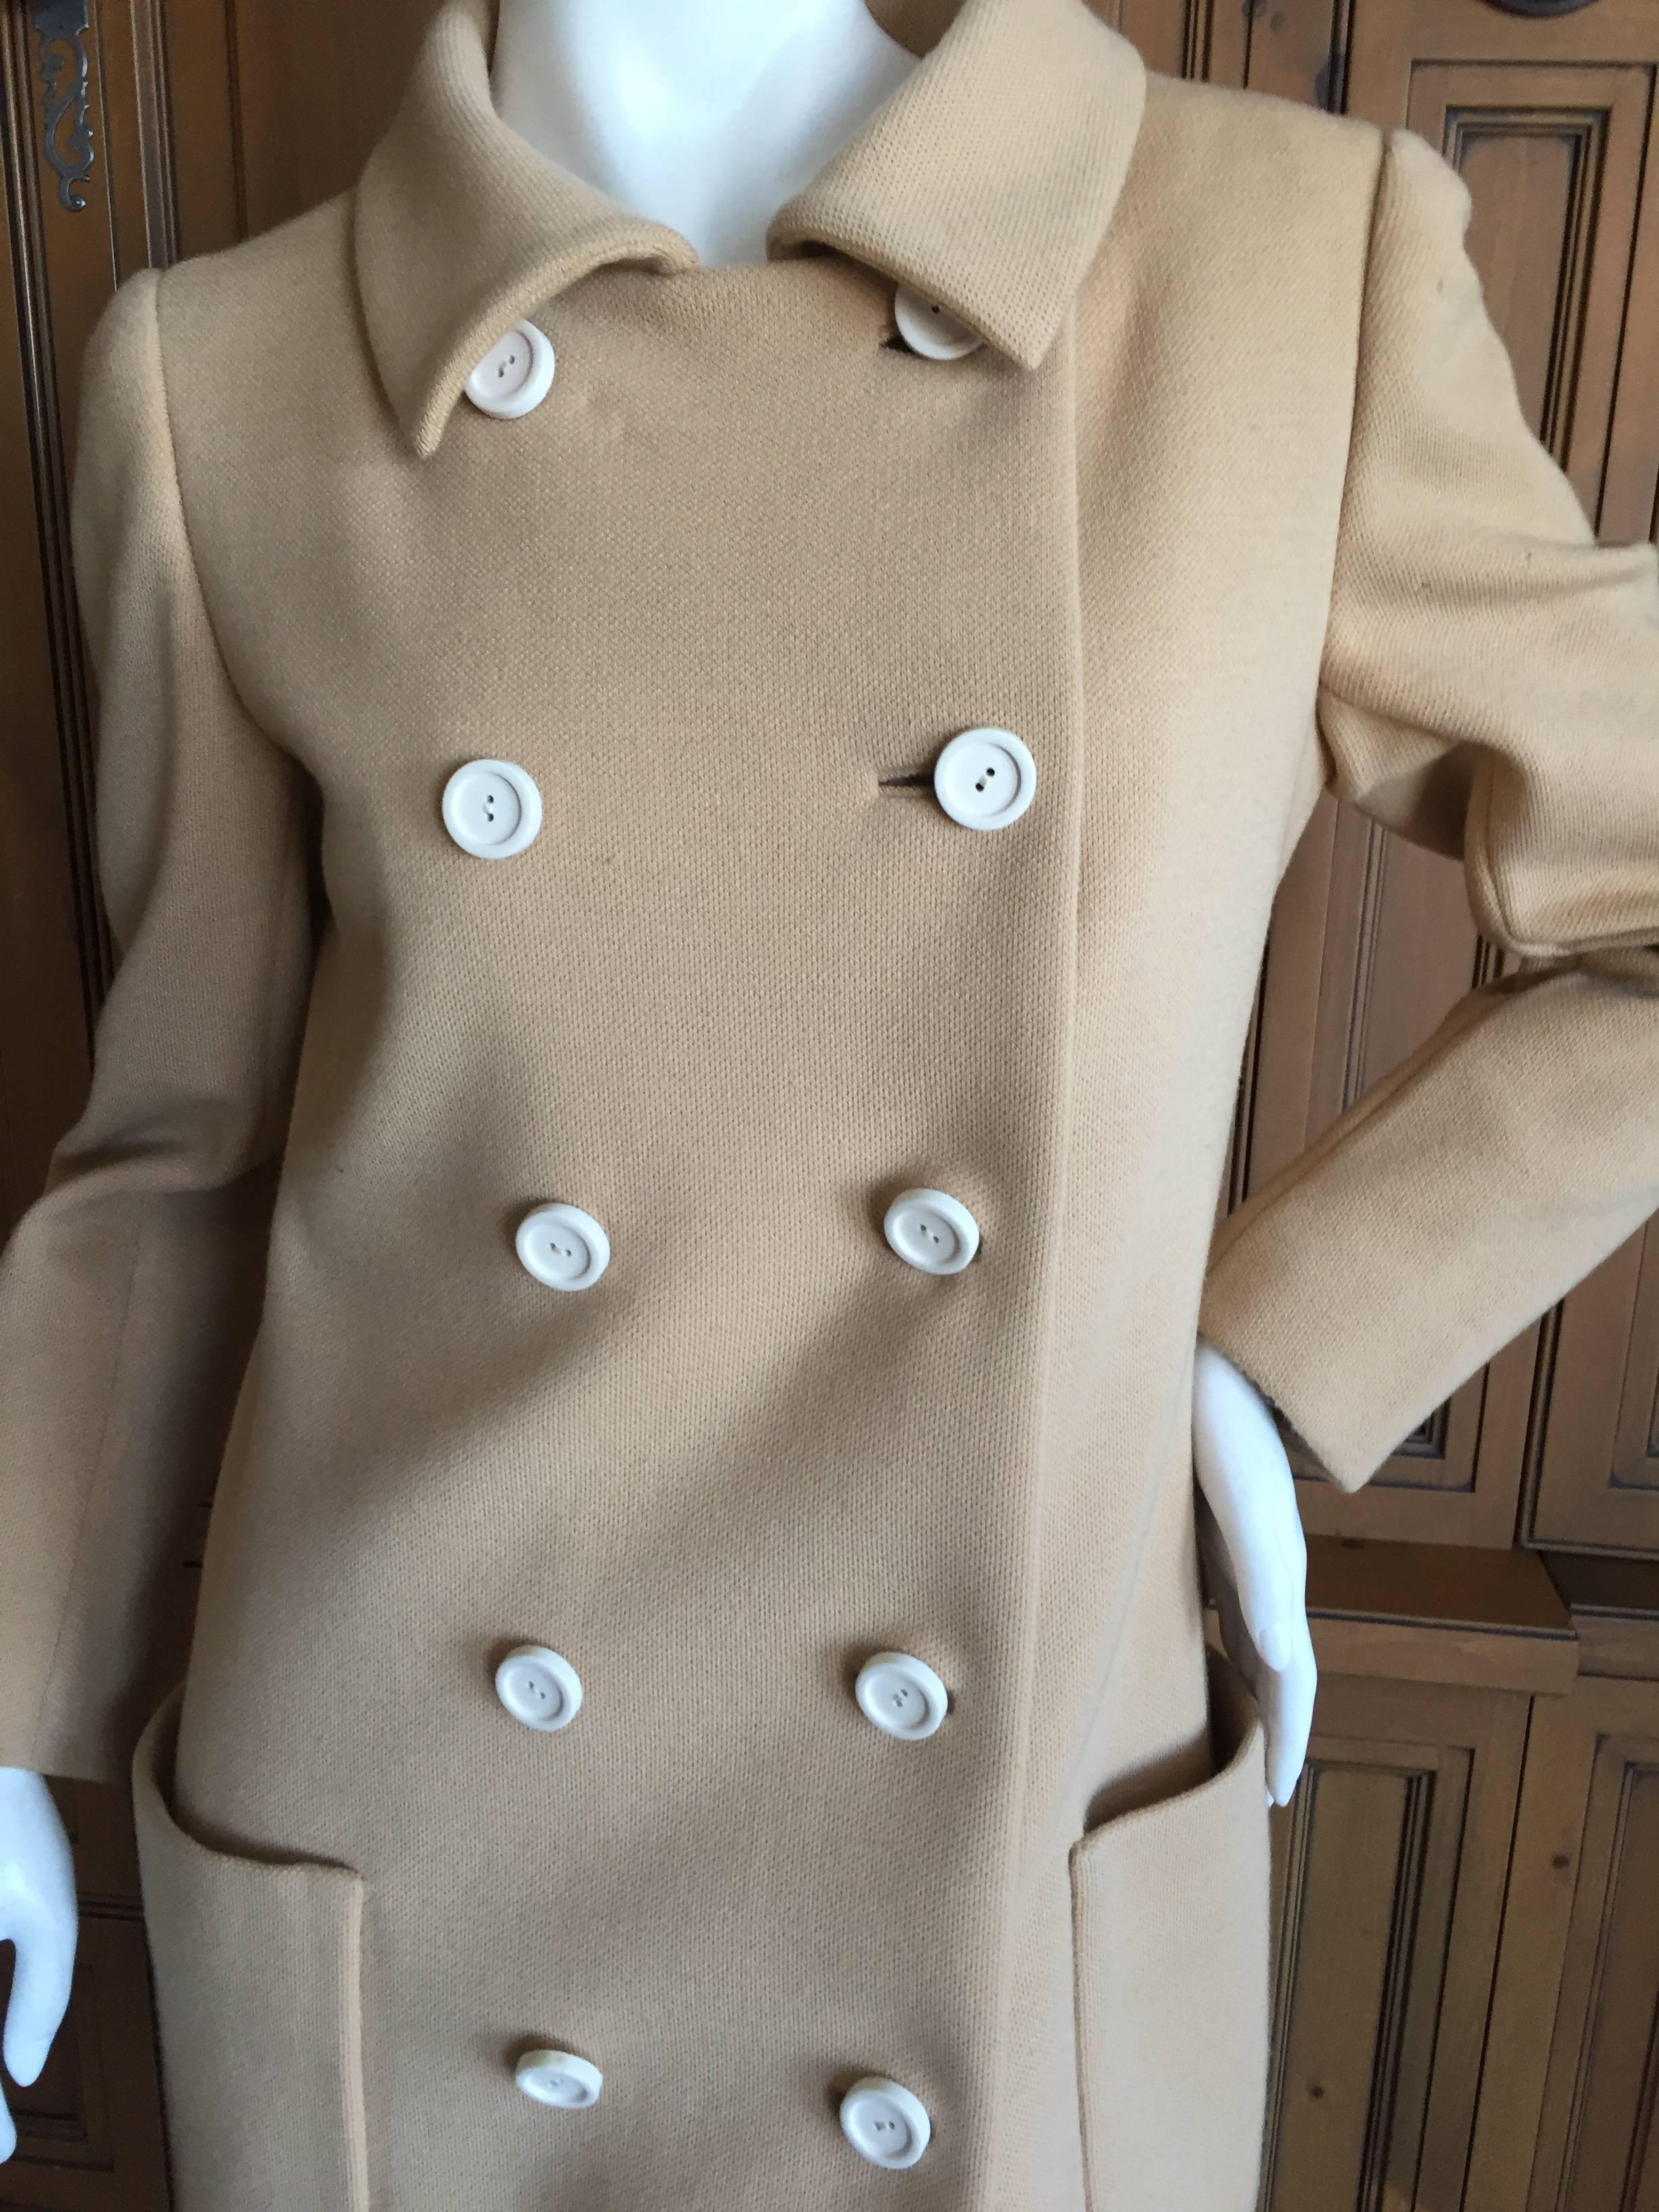 Norman Norell 1960 Light Brown Coat.
Lined in silk taffeta with working sleeve buttons.
Norell was considered Haute Couture in America and the prices were very expensive.
Bust 39